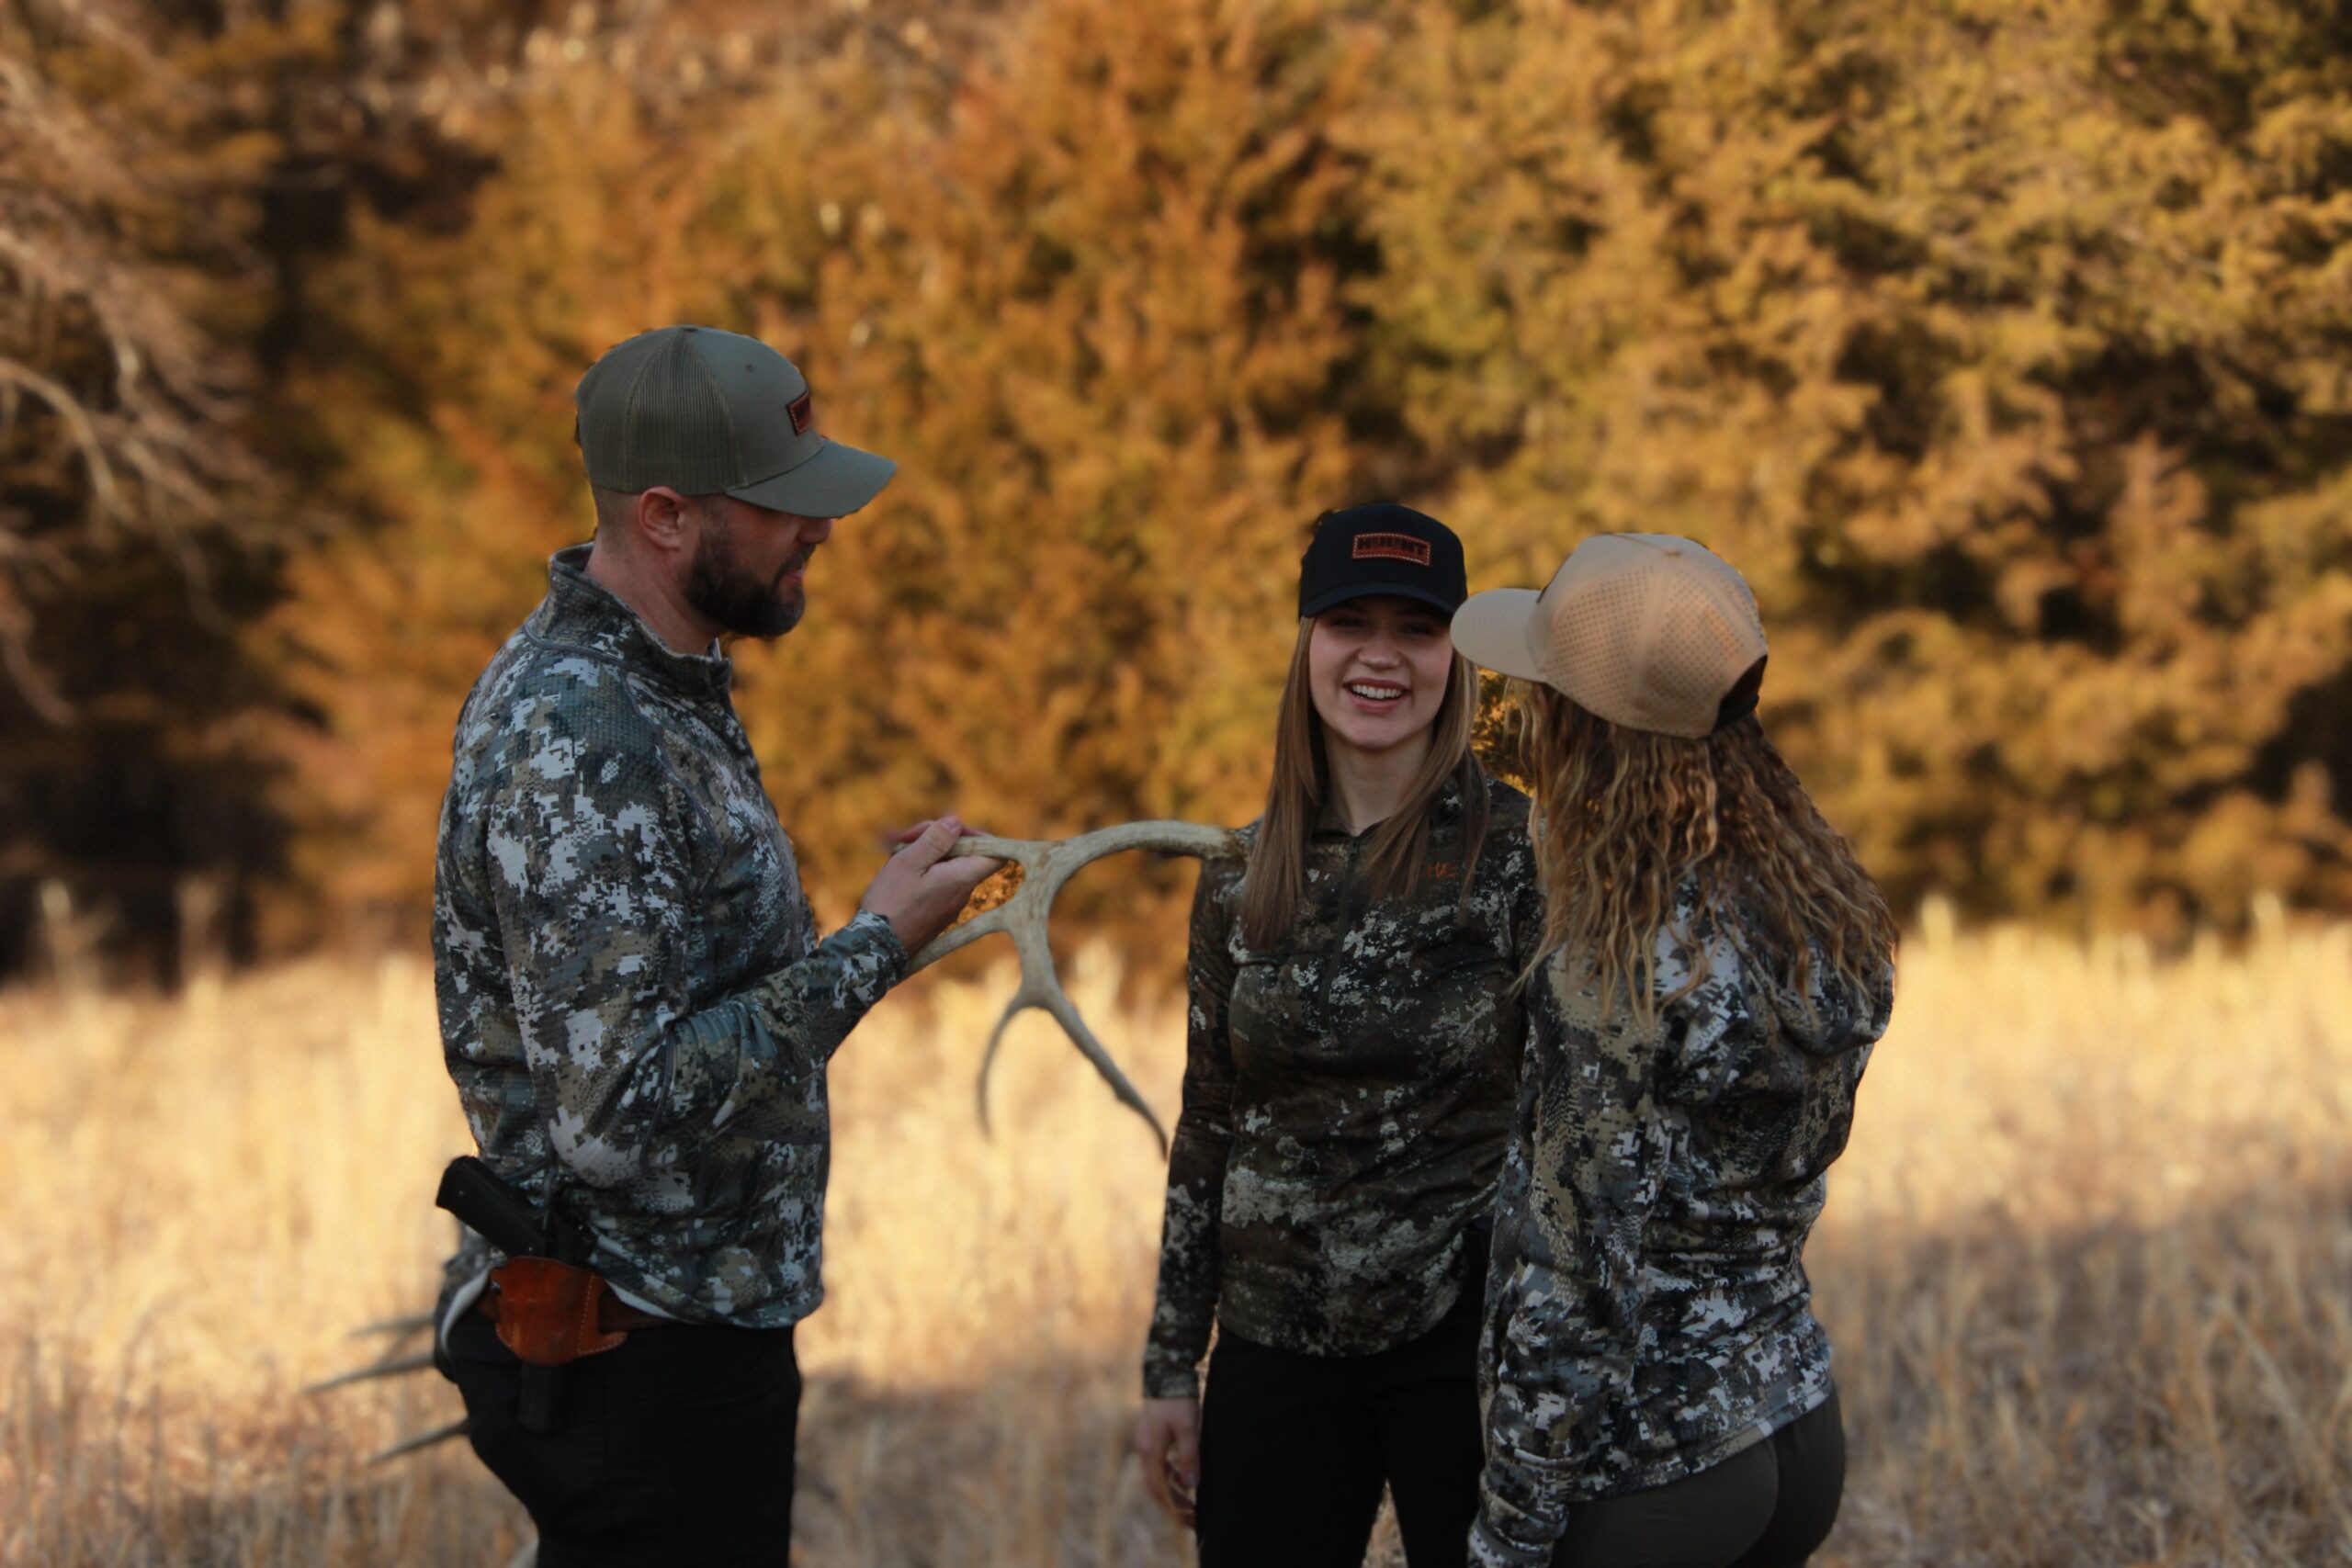 Experienced hunter shows two new women hunters tips and tricks